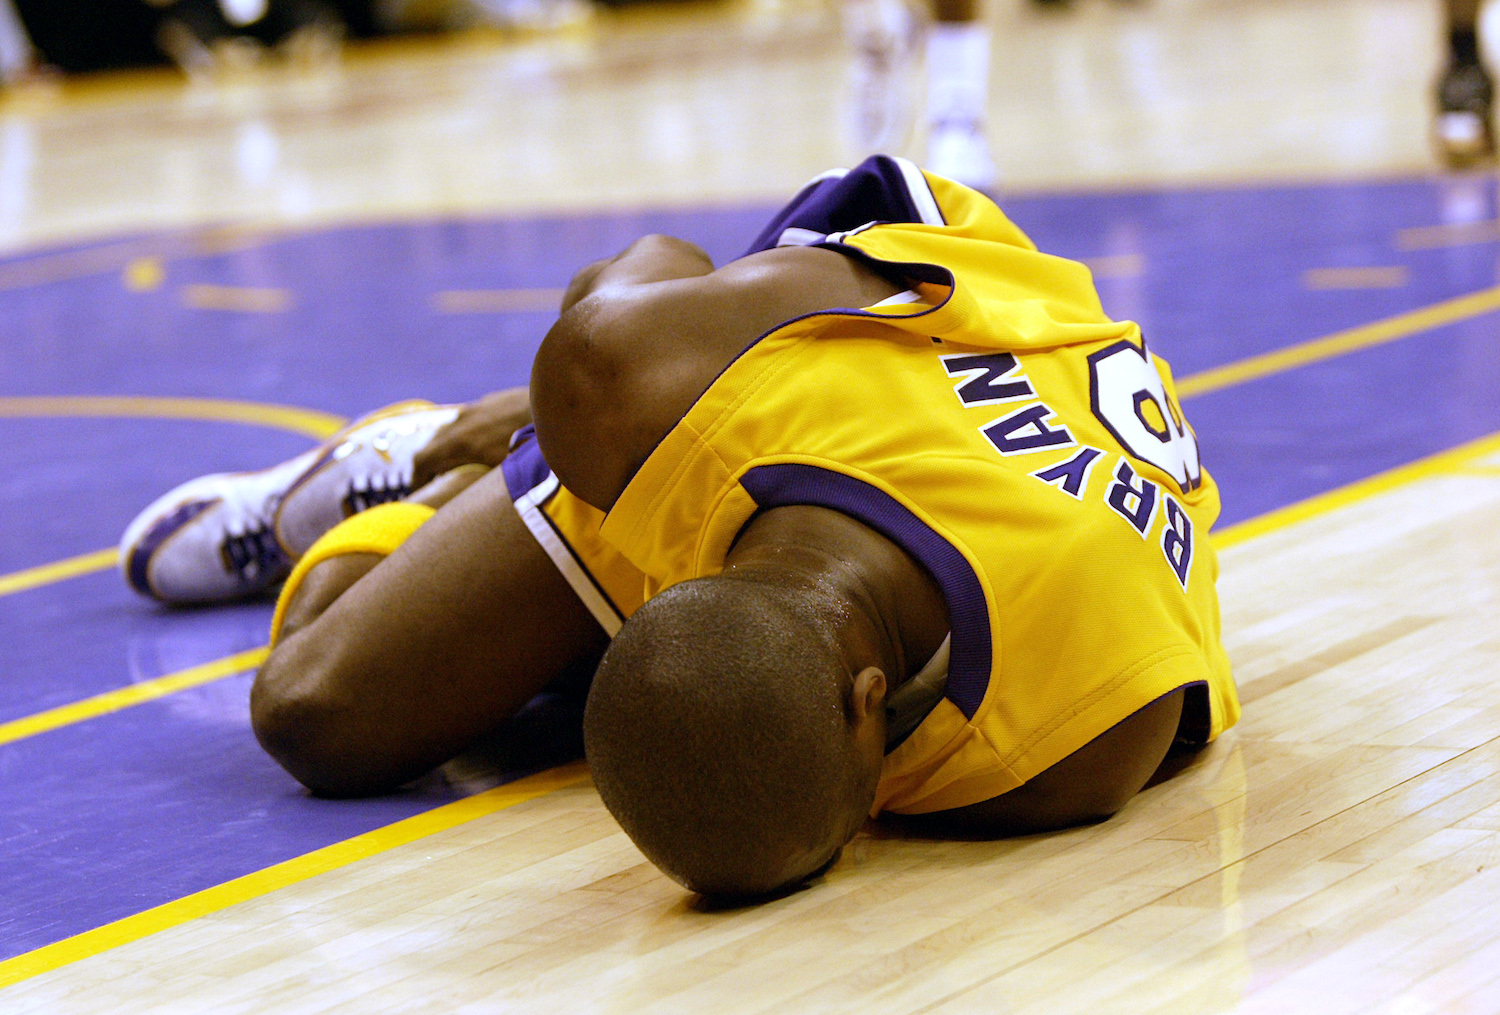 Lakers legend Kobe Bryant holds his ankle after a 2005 injury.